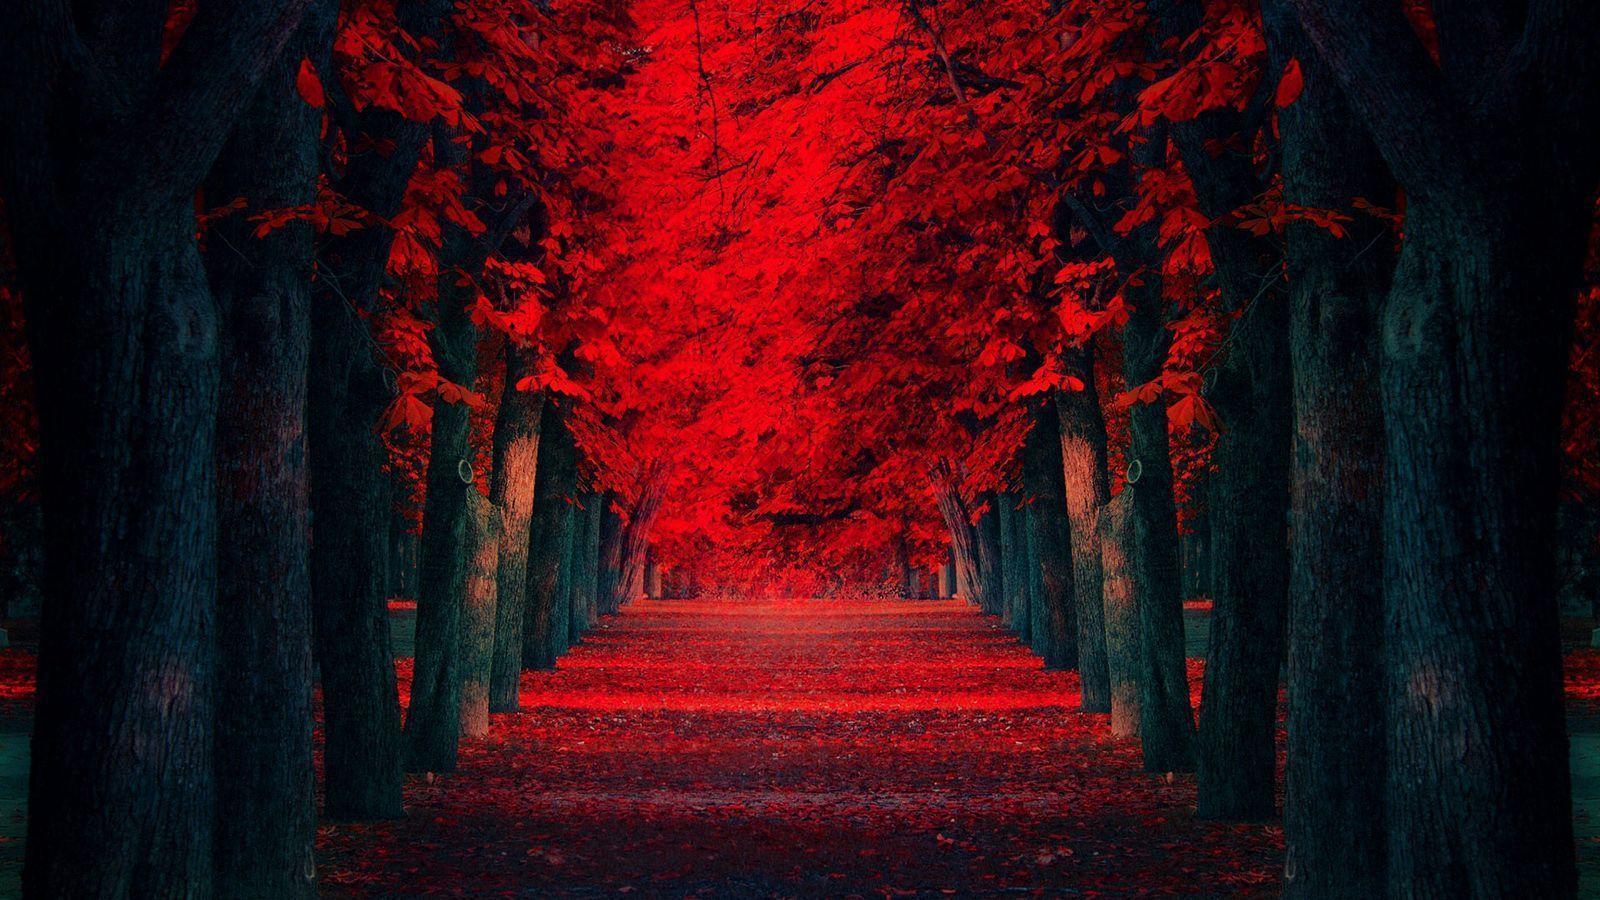 Red Leaves Wallpapers - Wallpaper Cave